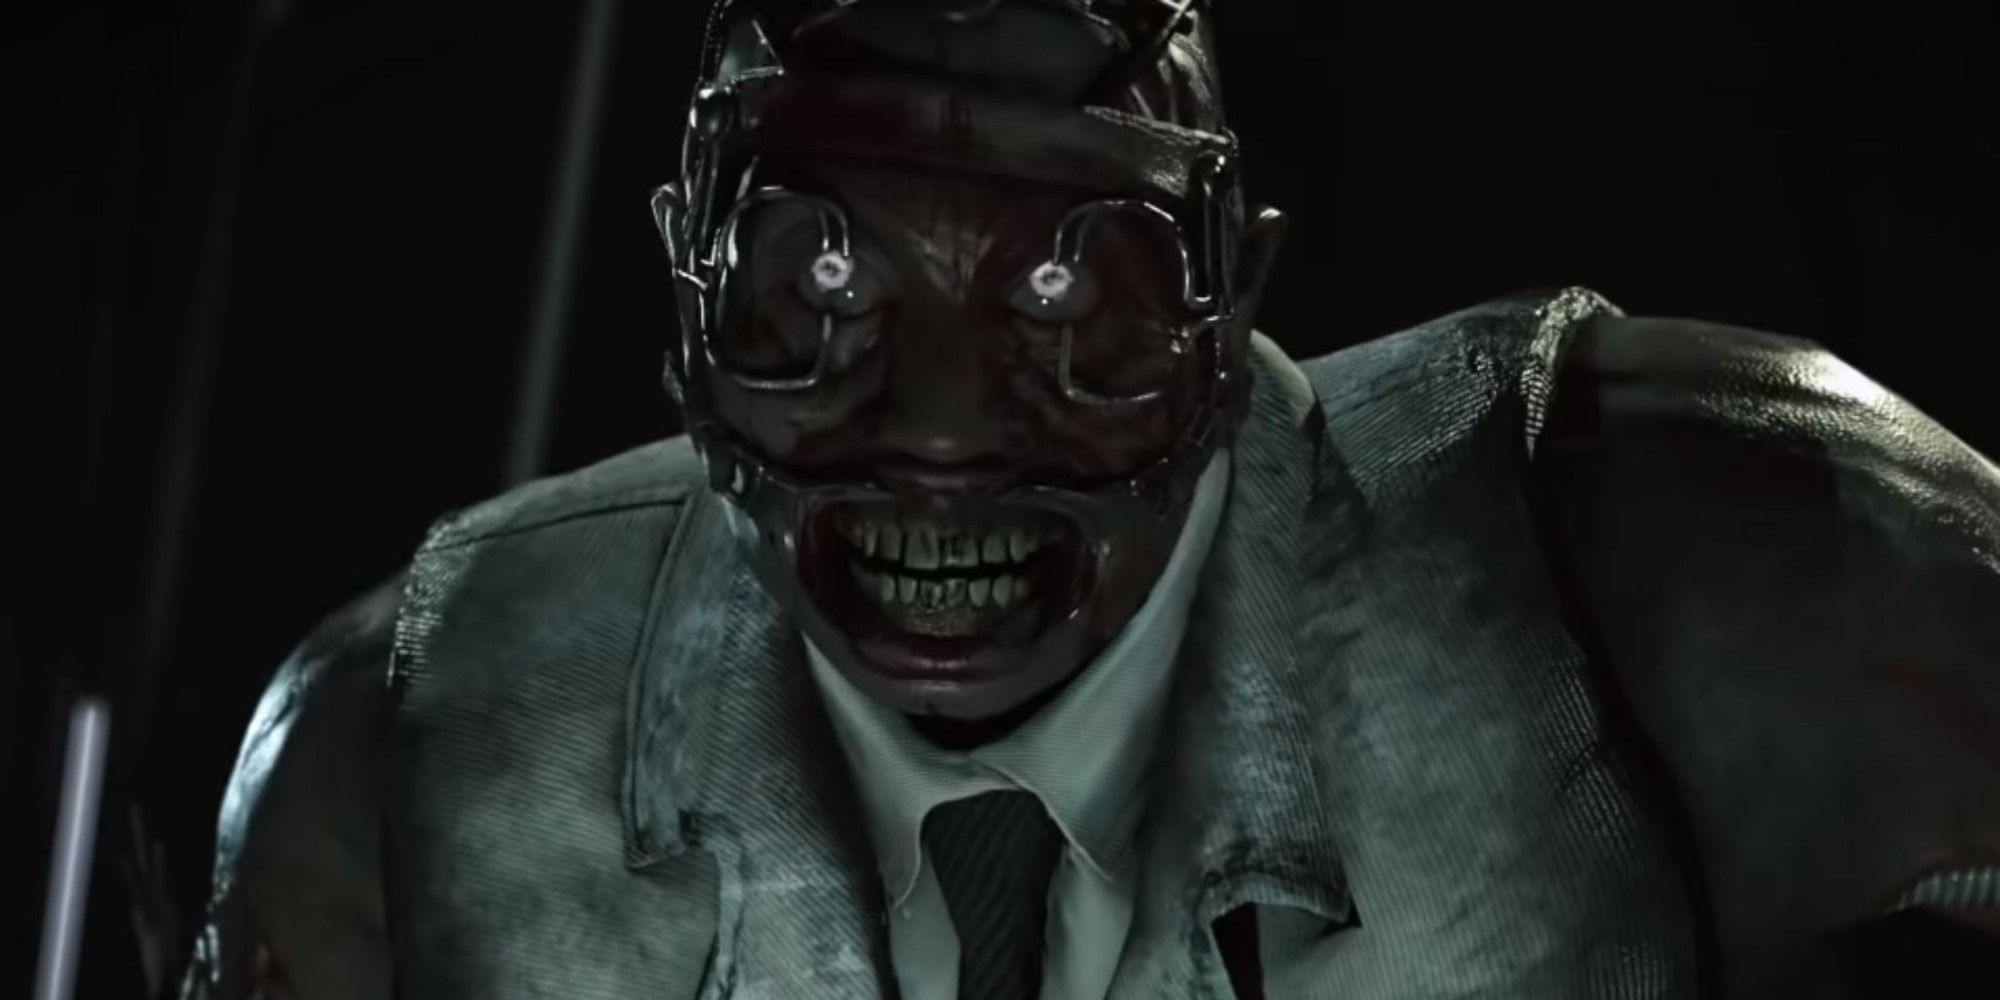 The Doctor killer character in Dead By Daylight